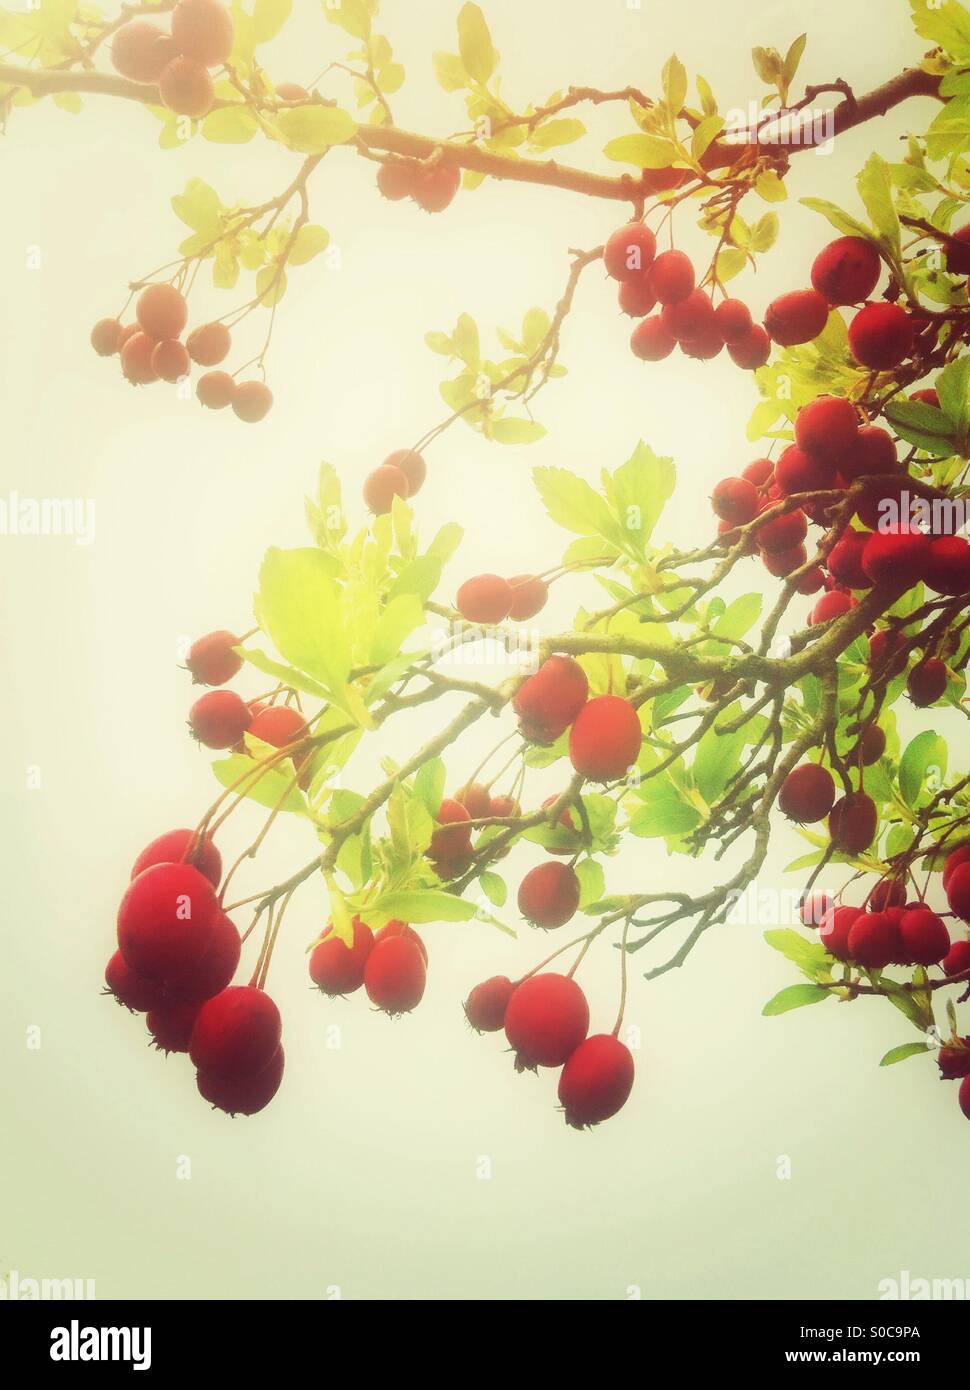 Wild red berries on branches Stock Photo